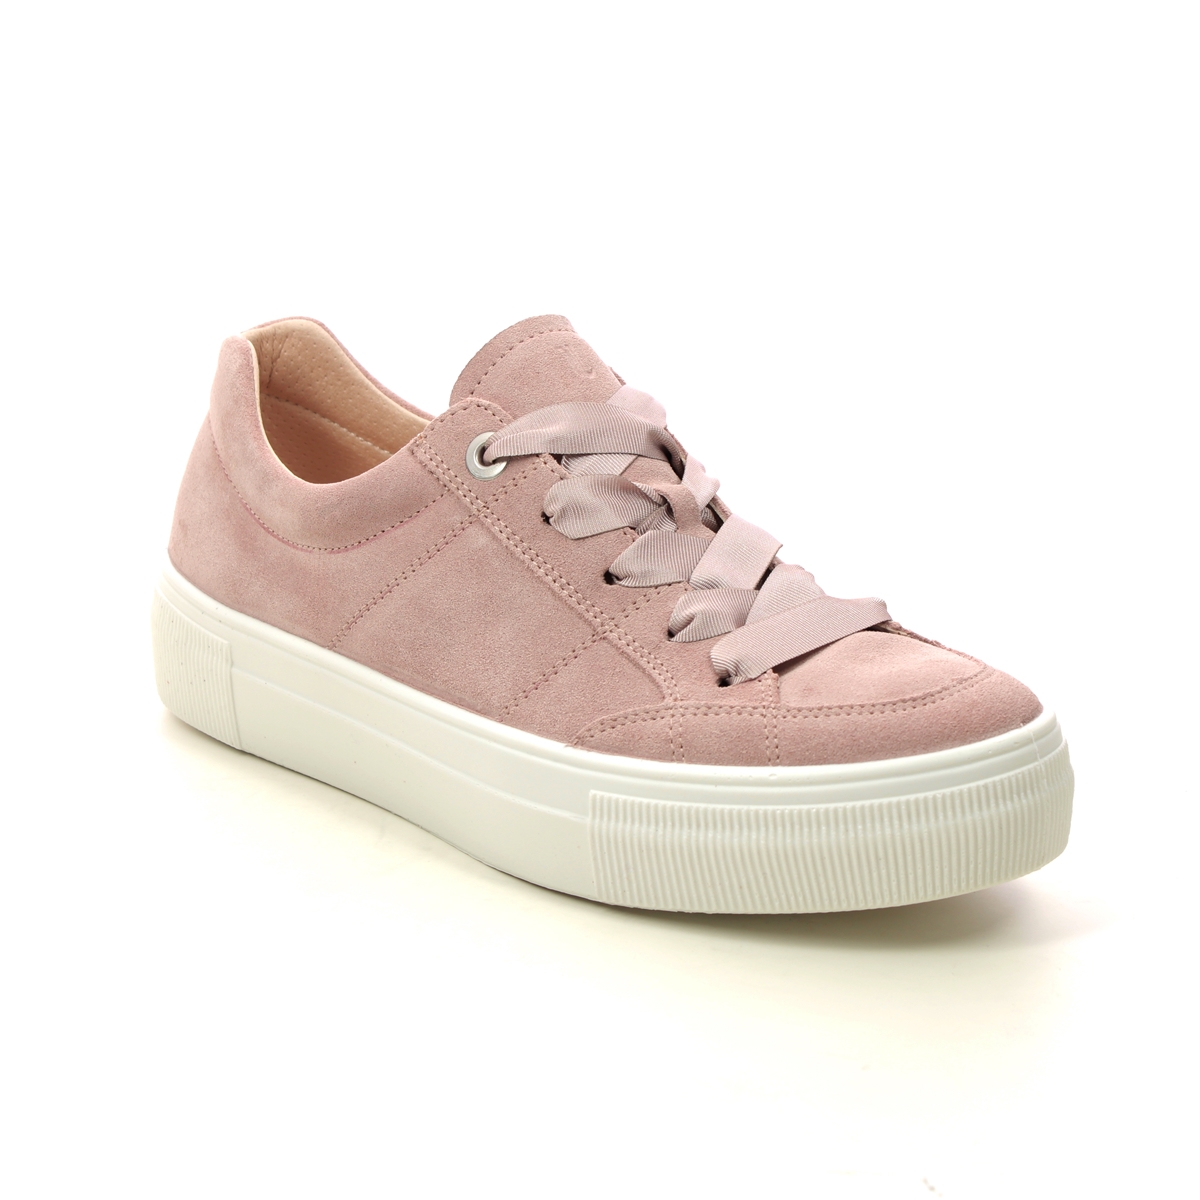 Legero Lima Stitch Pink Suede Womens Trainers 0600910-5600 In Size 40 In Plain Pink Suede